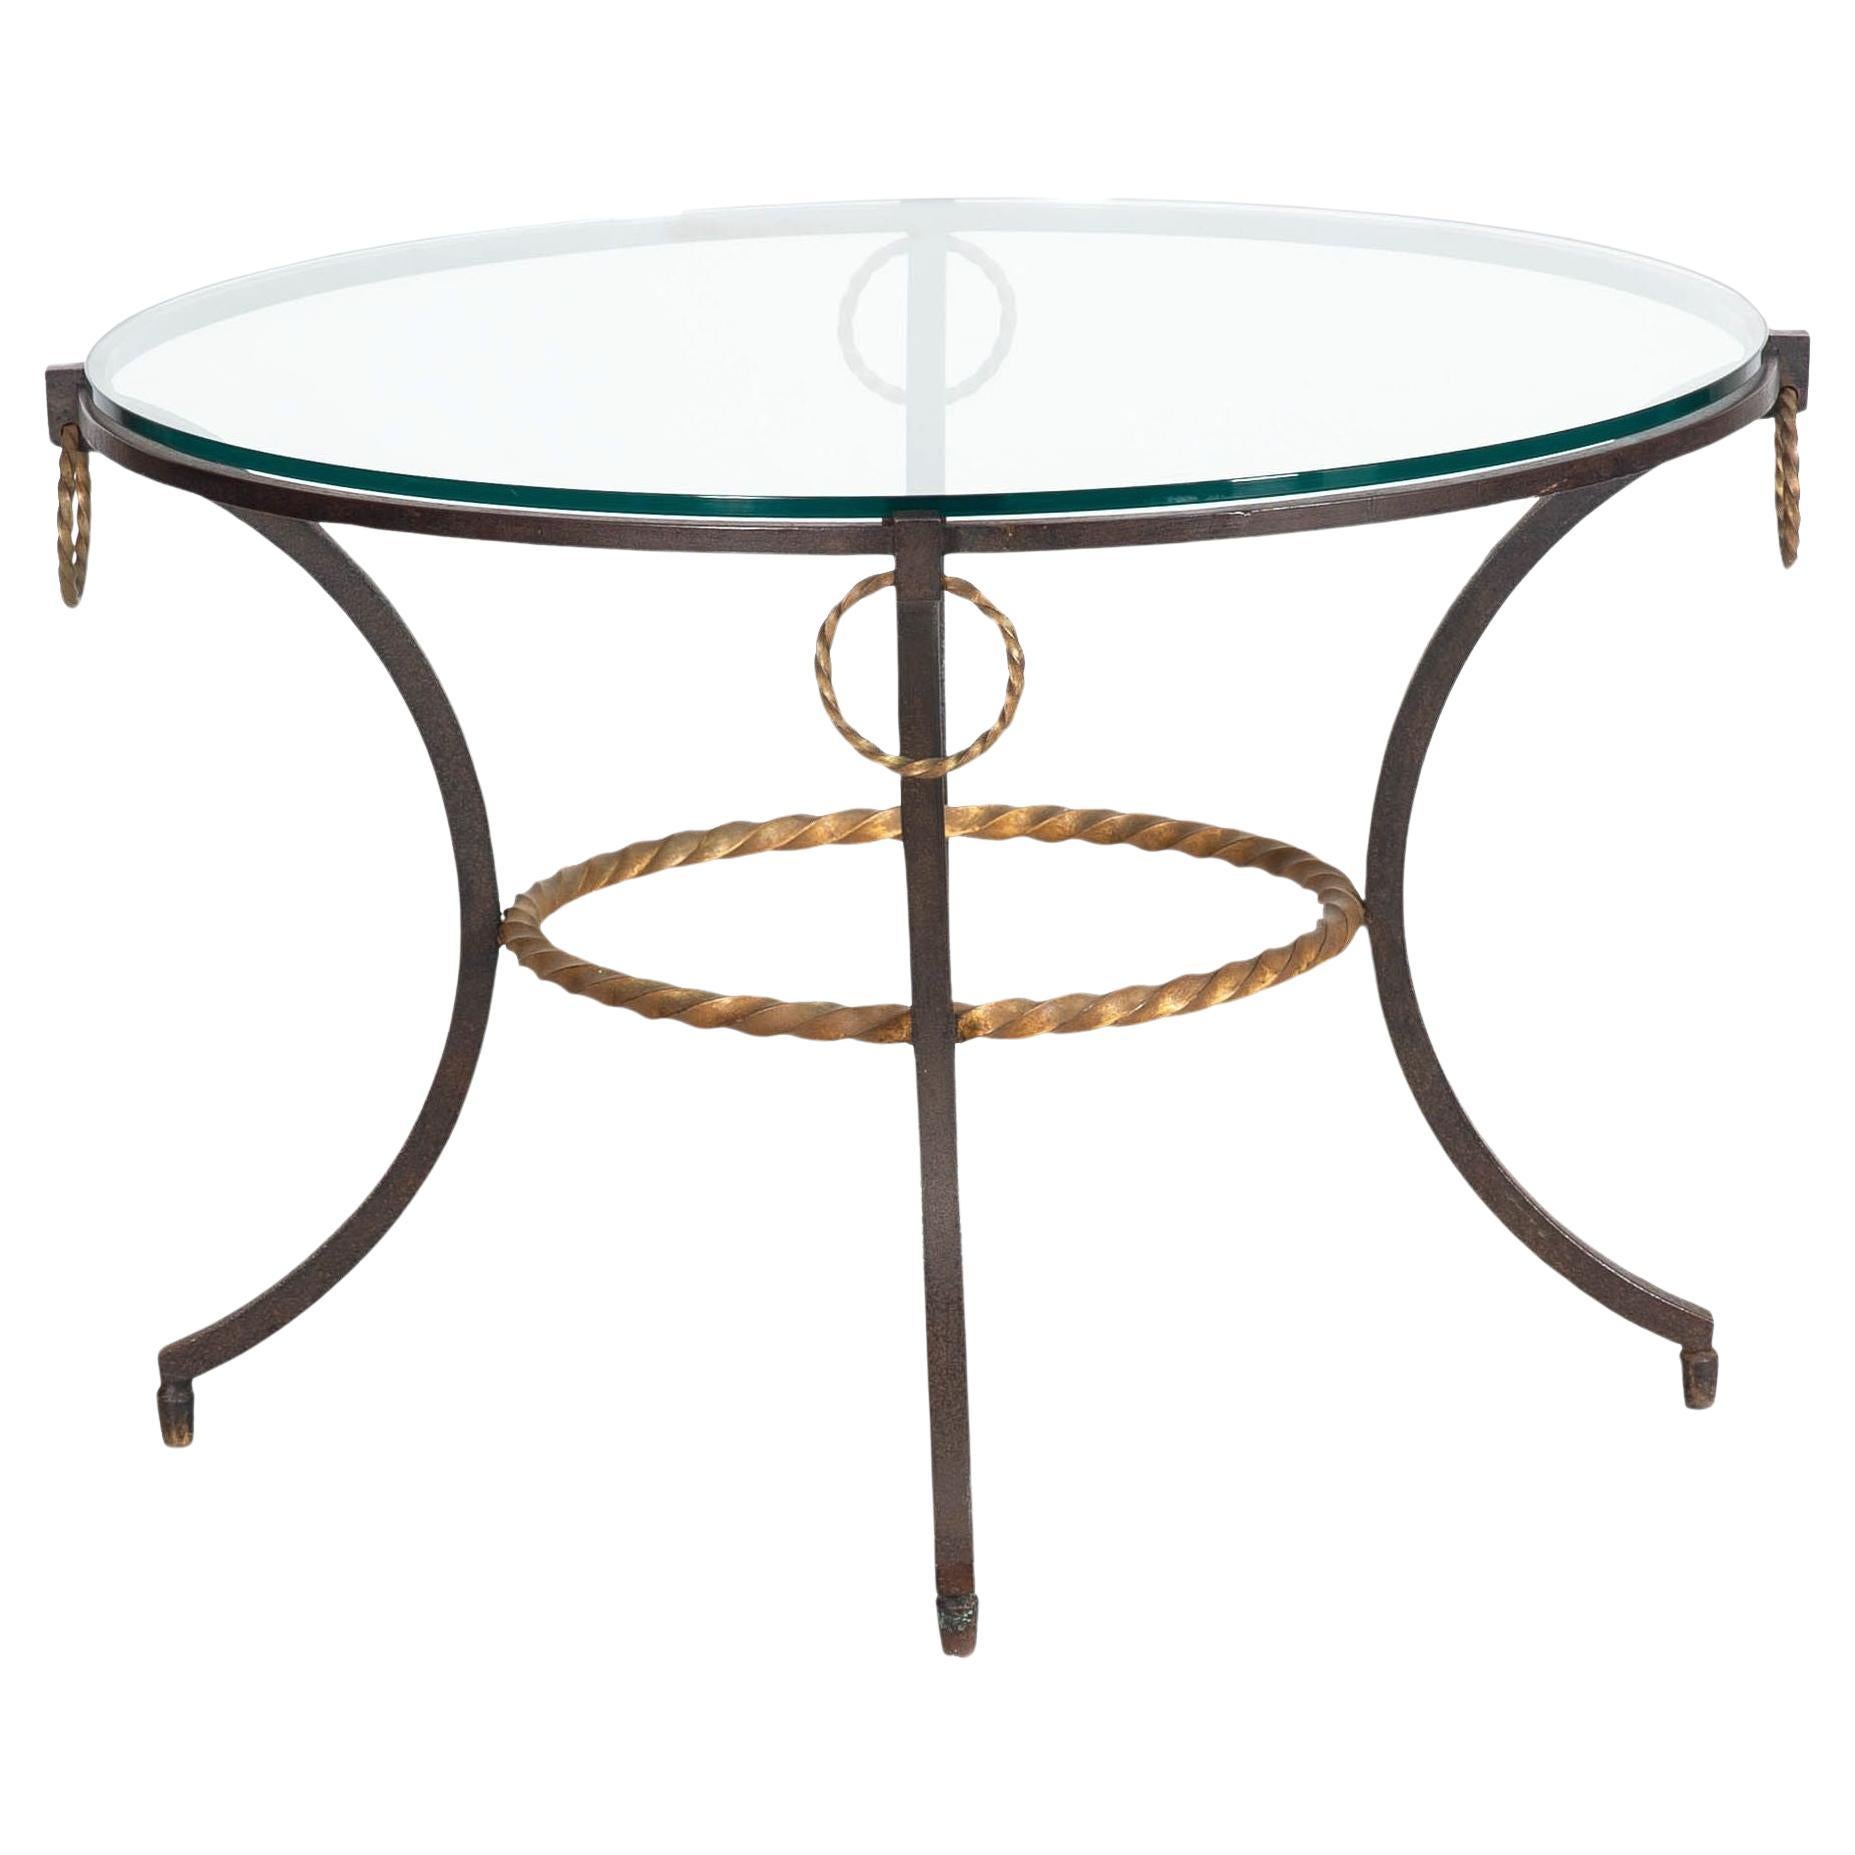 French Modernist Wrought-Iron & Glass Cocktail Side Coffee Table ca. 1950s For Sale